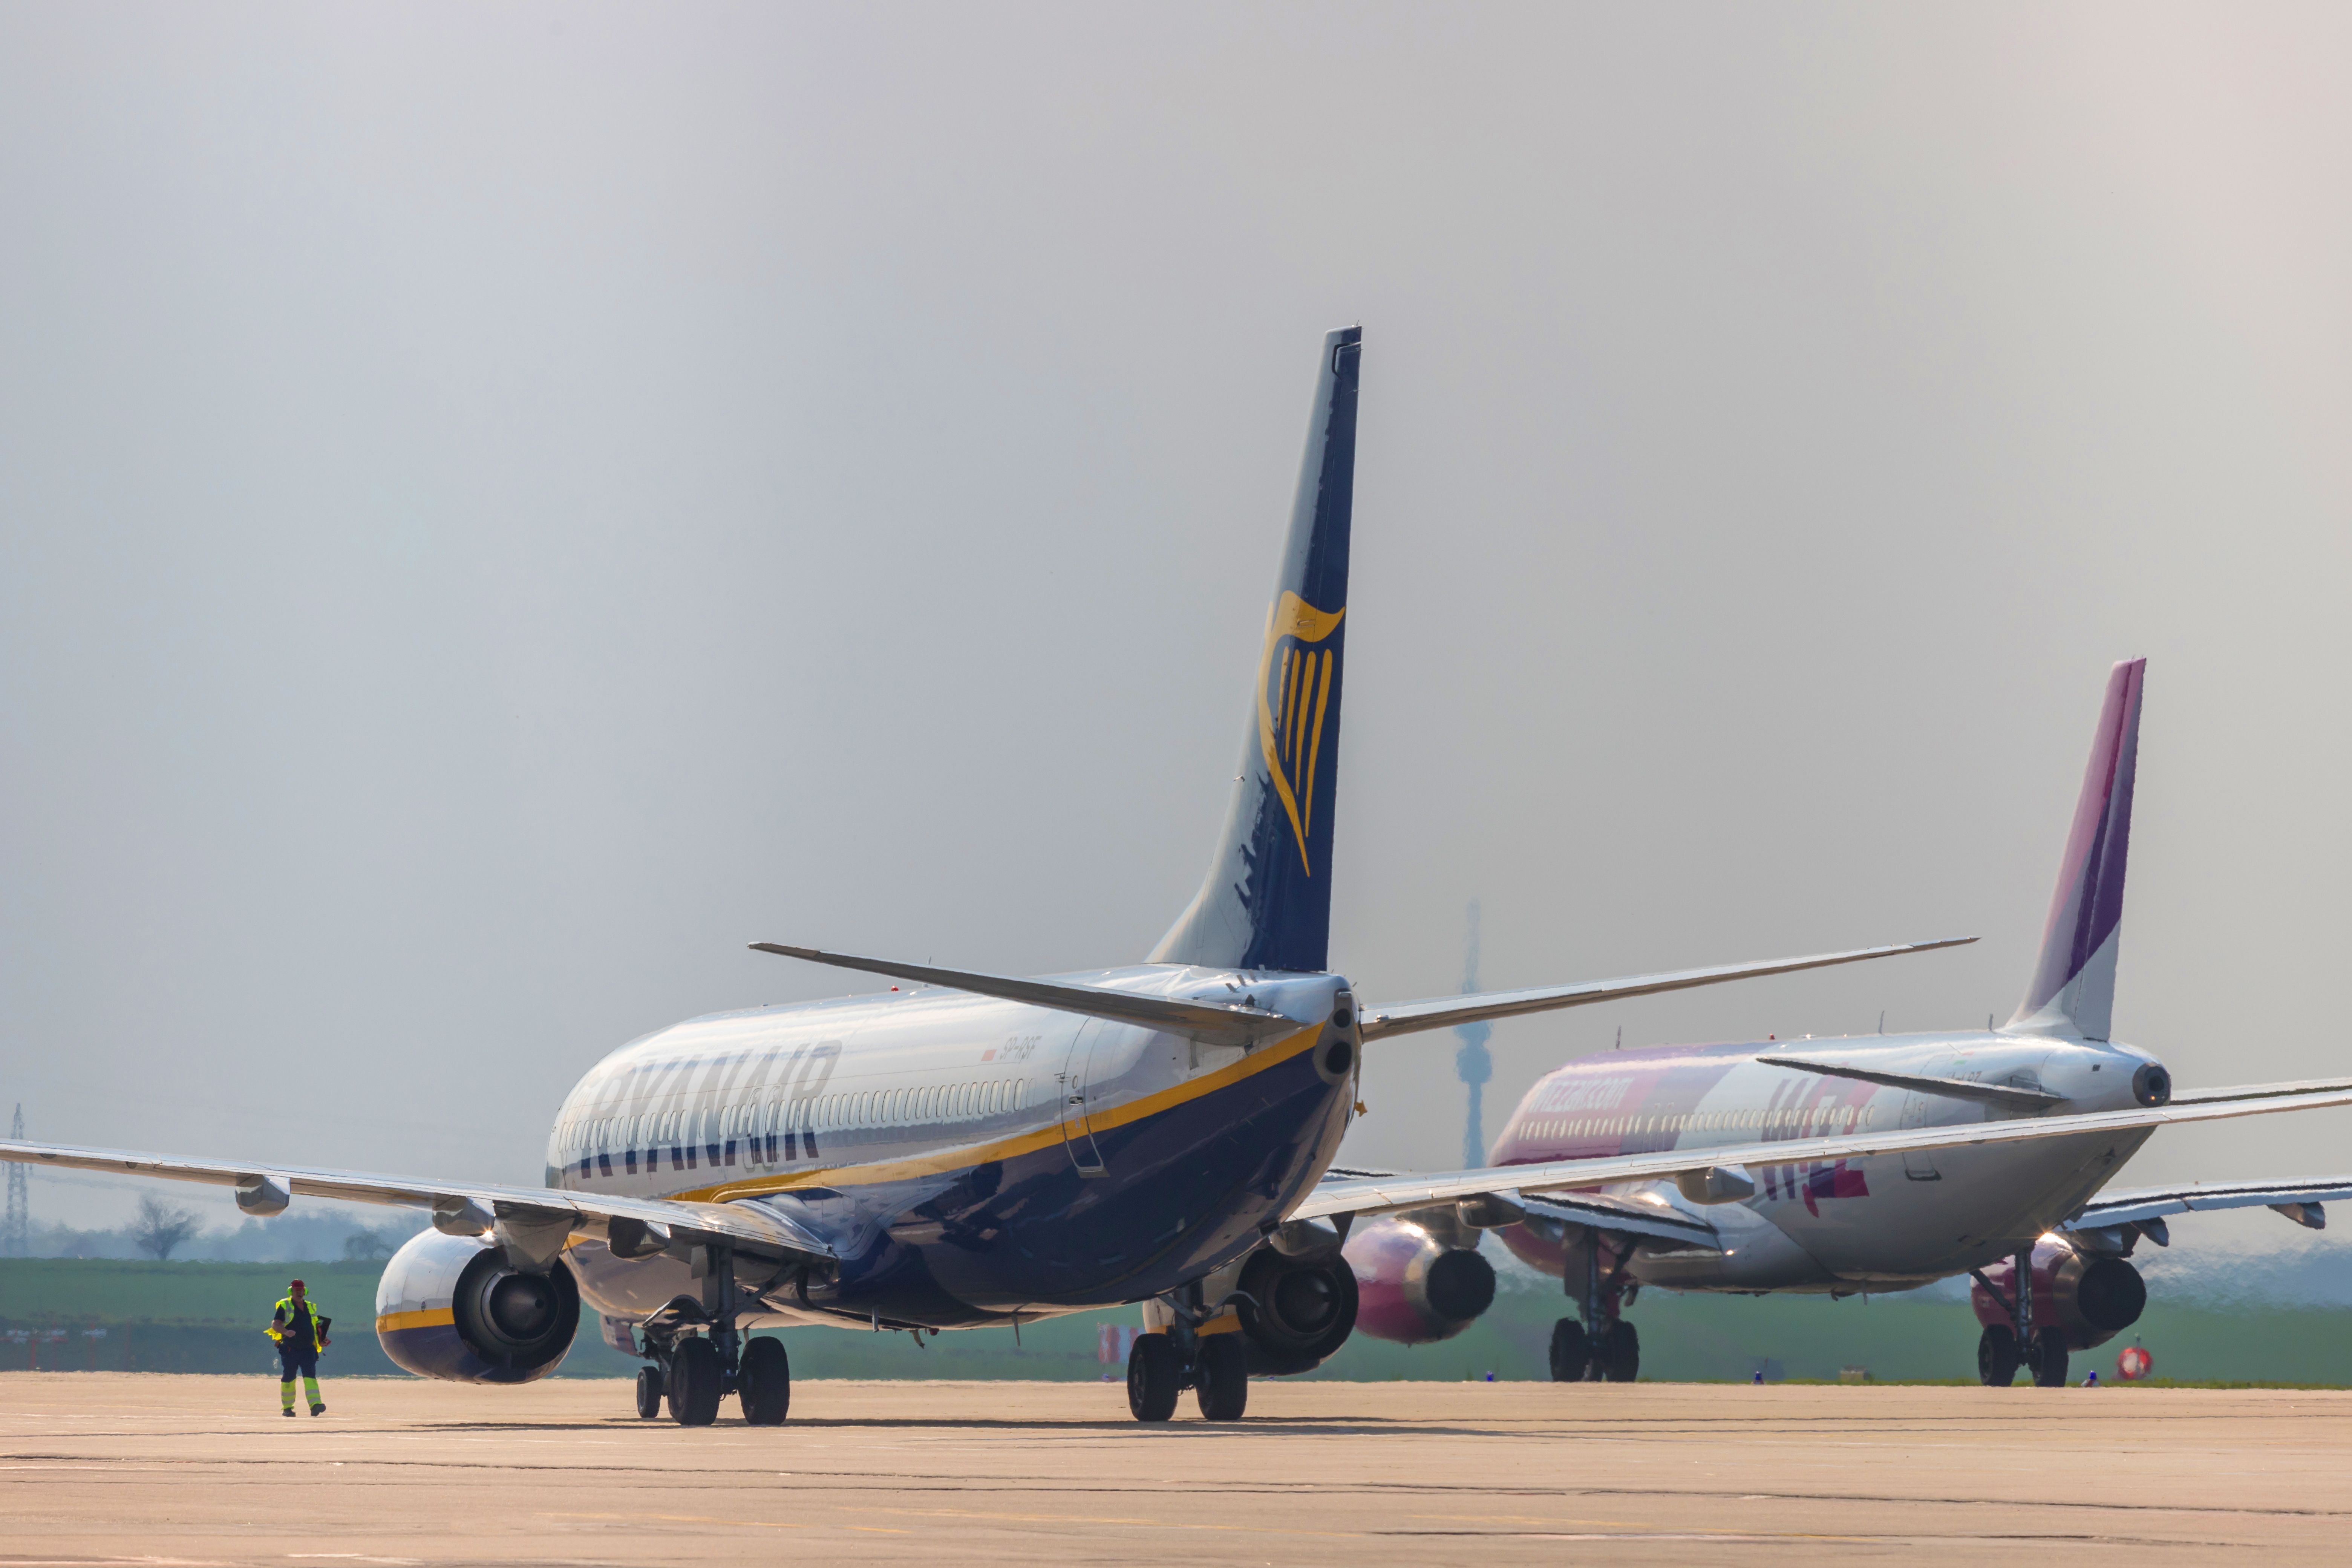 Ryanair and Wizz Air jets on the tarmac at Dortmund Airport